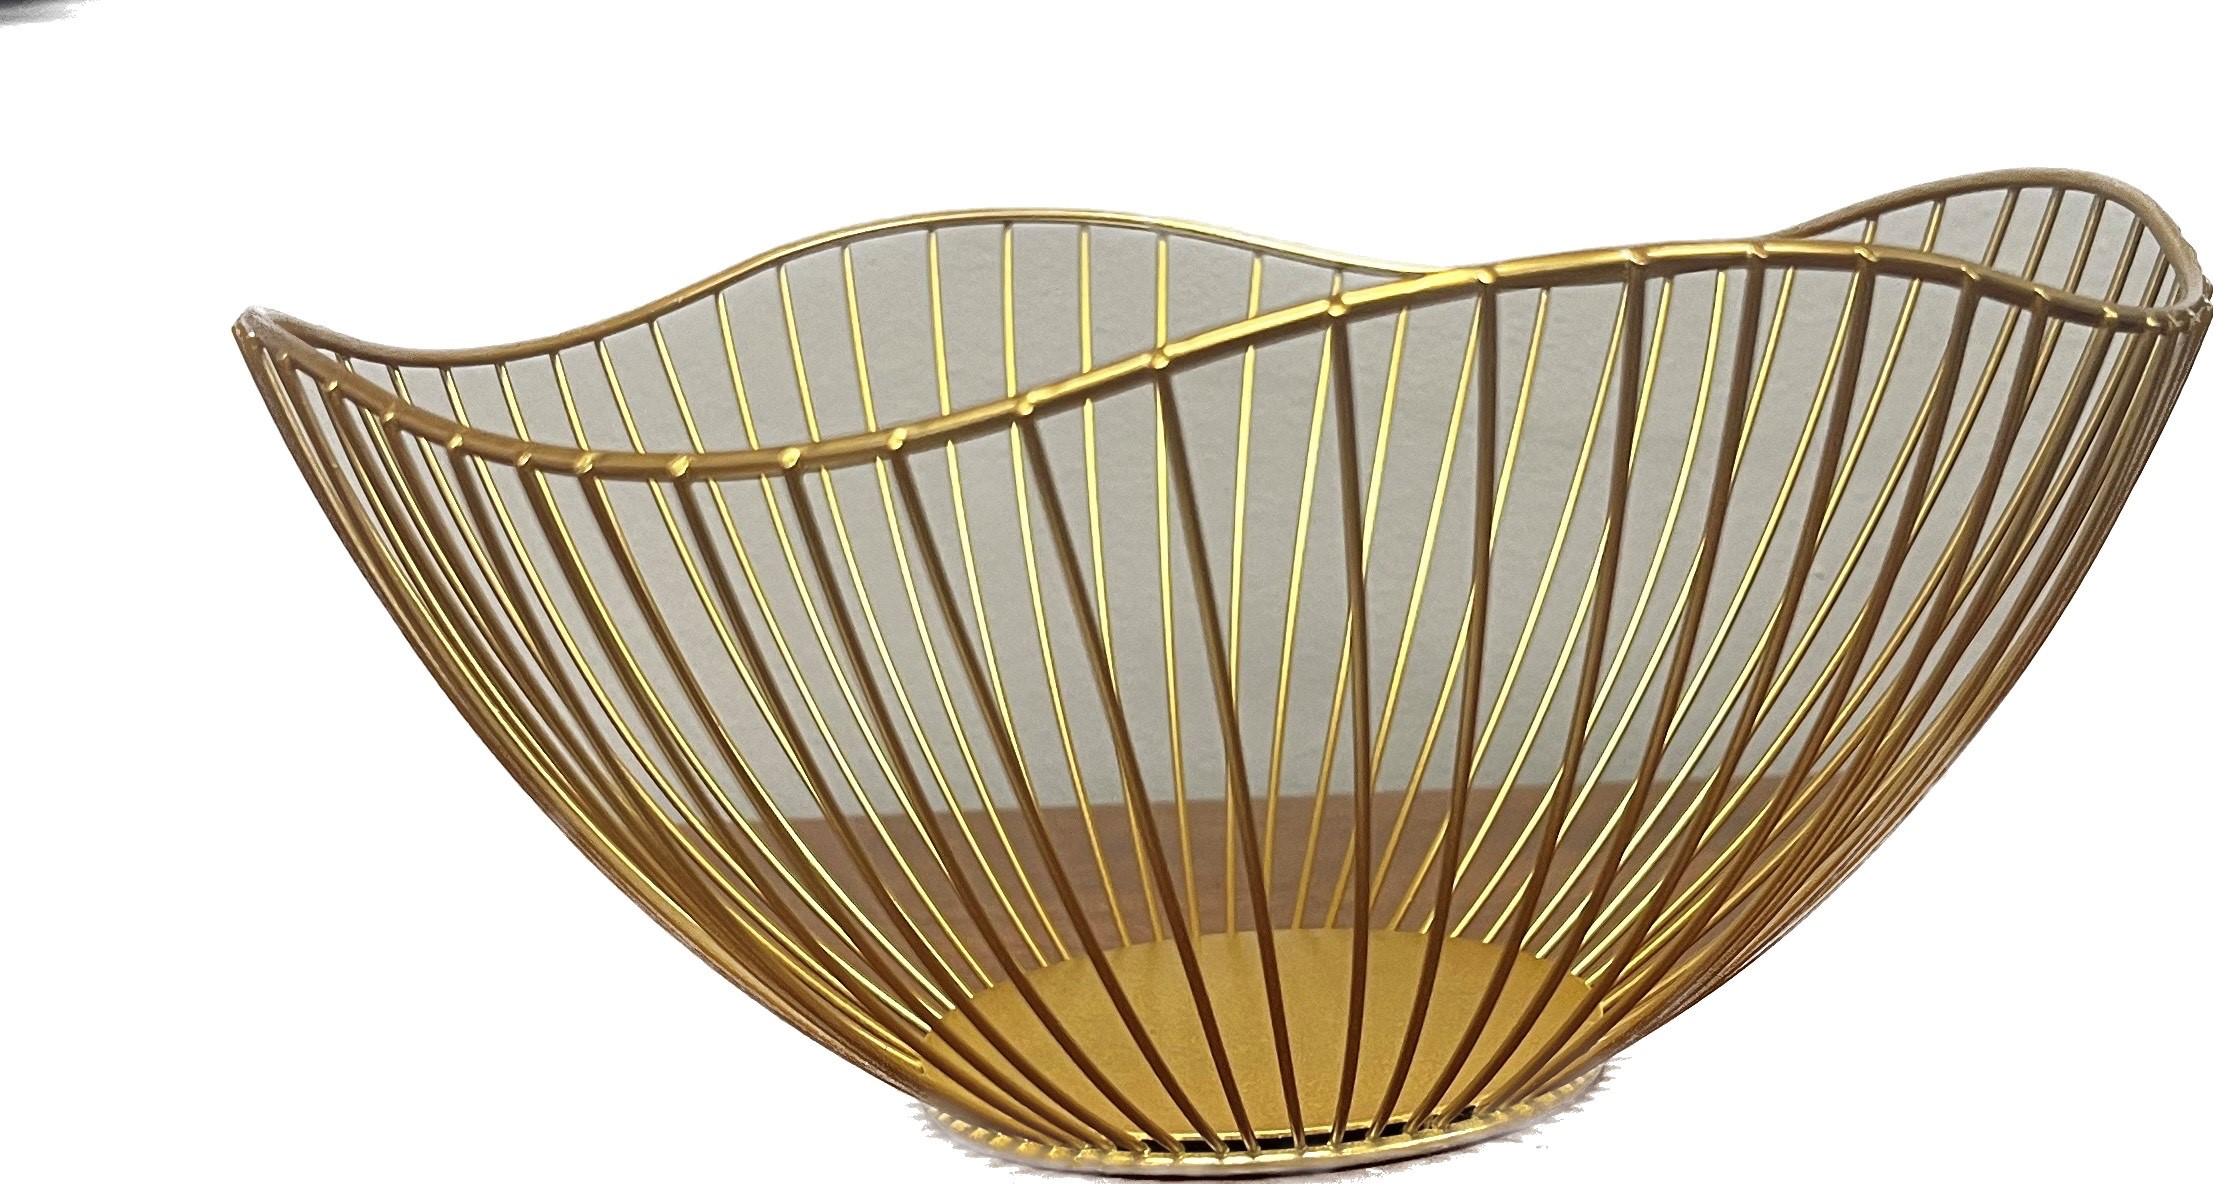 Deluxe Gold Bread Basket 10" by 5 "